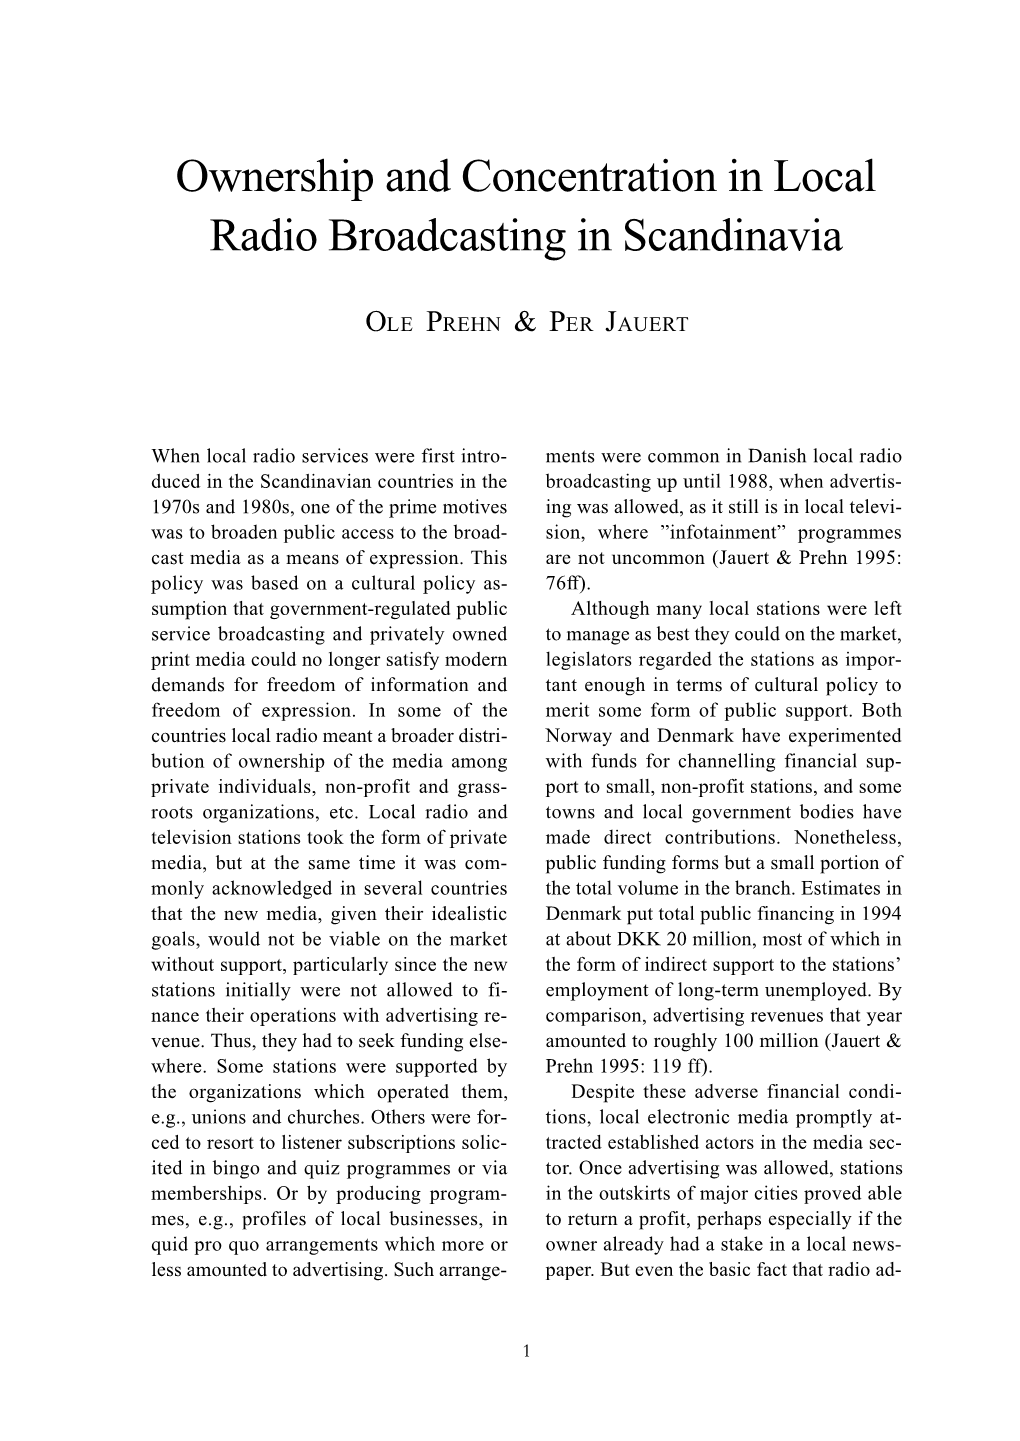 Ownership and Concentration in Local Radio Broadcasting in Scandinavia